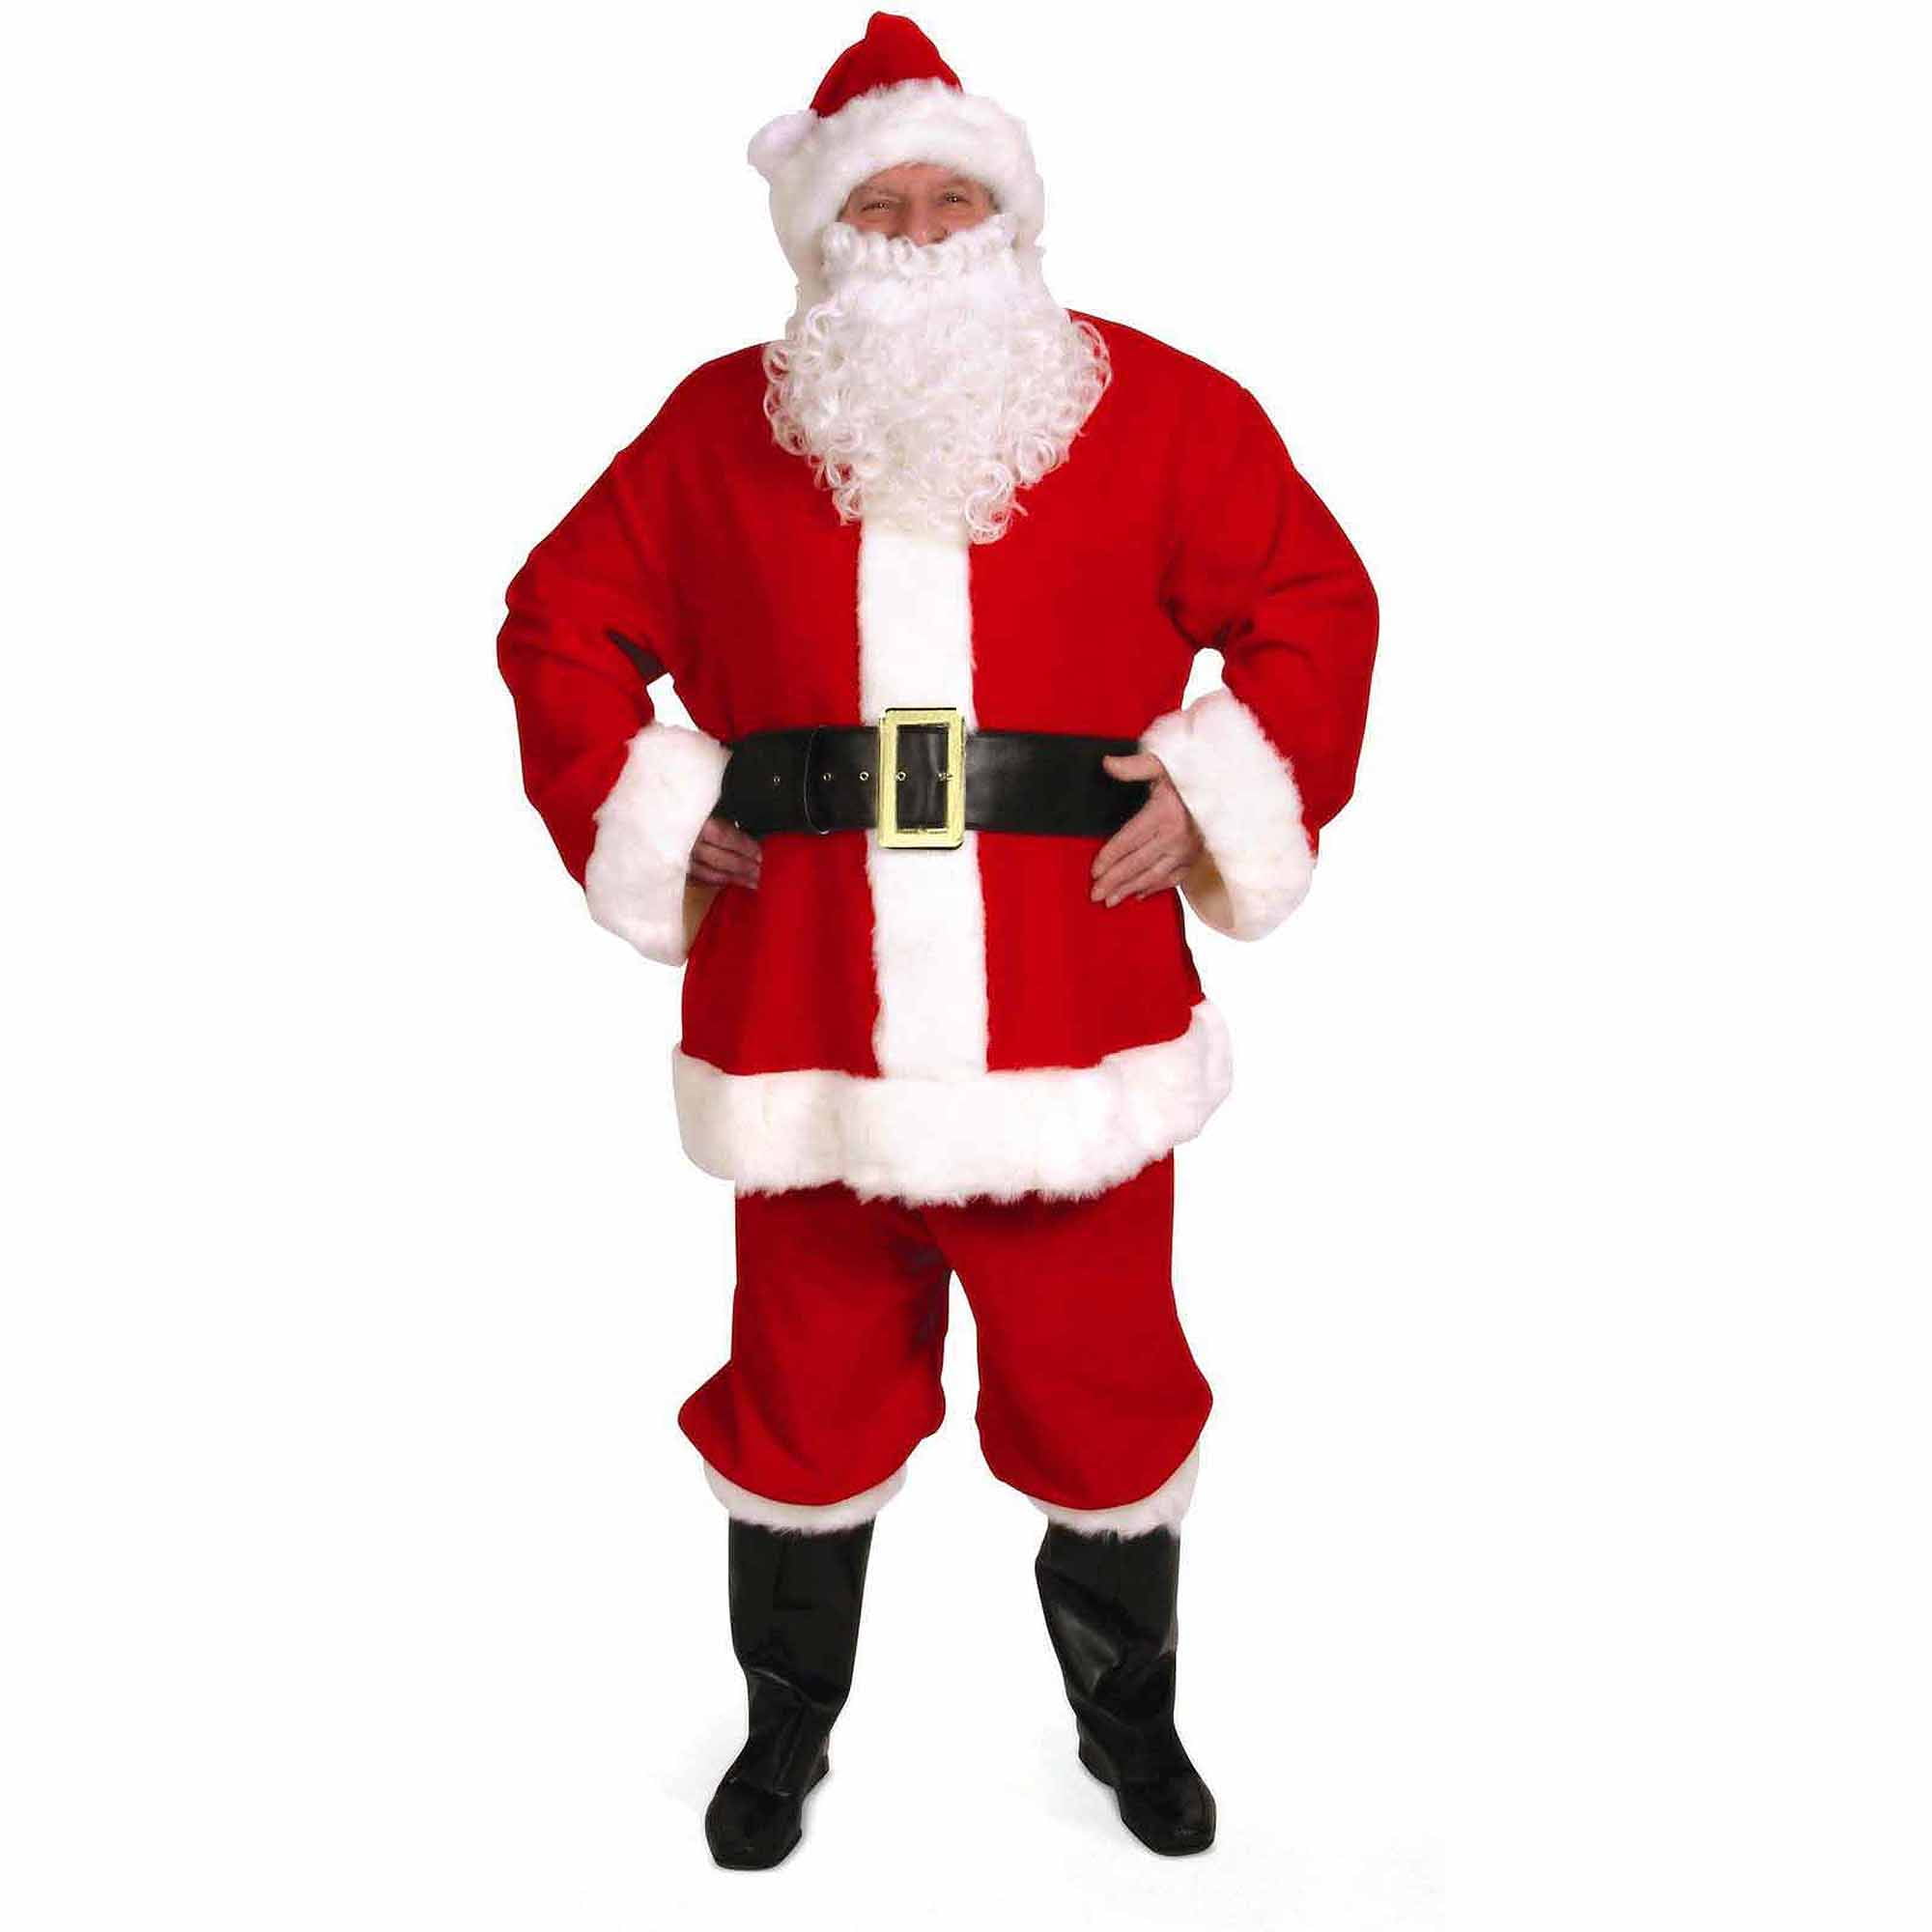 Christmas Adults Men's Santa Outfit Red & White 3 pcs Costume Fancy Dress Party 